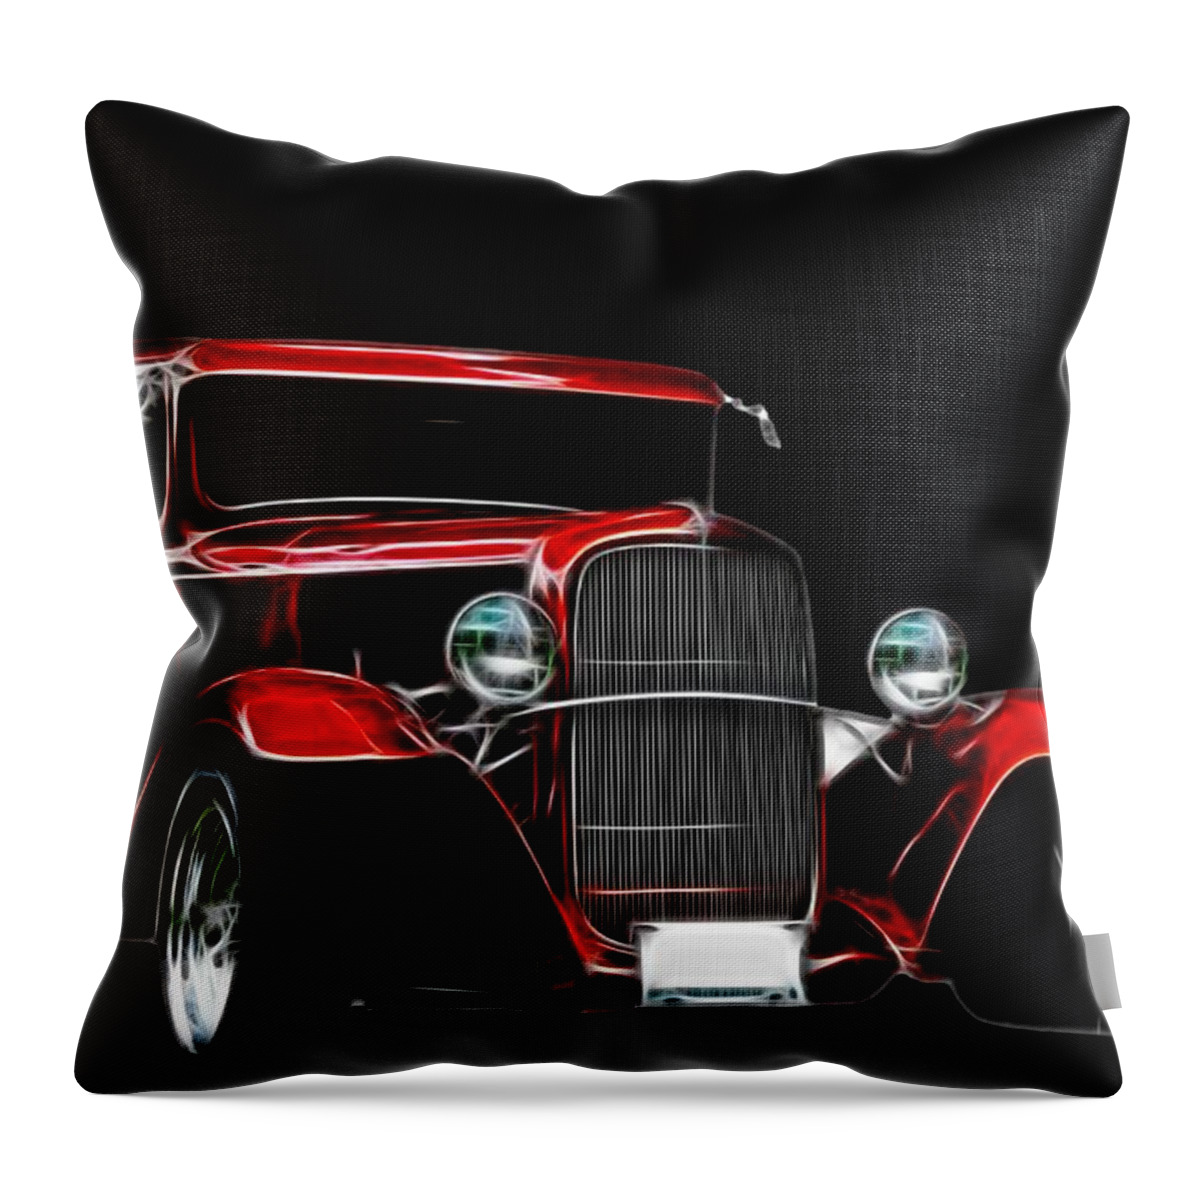 Automobile Throw Pillow featuring the digital art 1931 Ford Panel Truck 2 by Davandra Cribbie